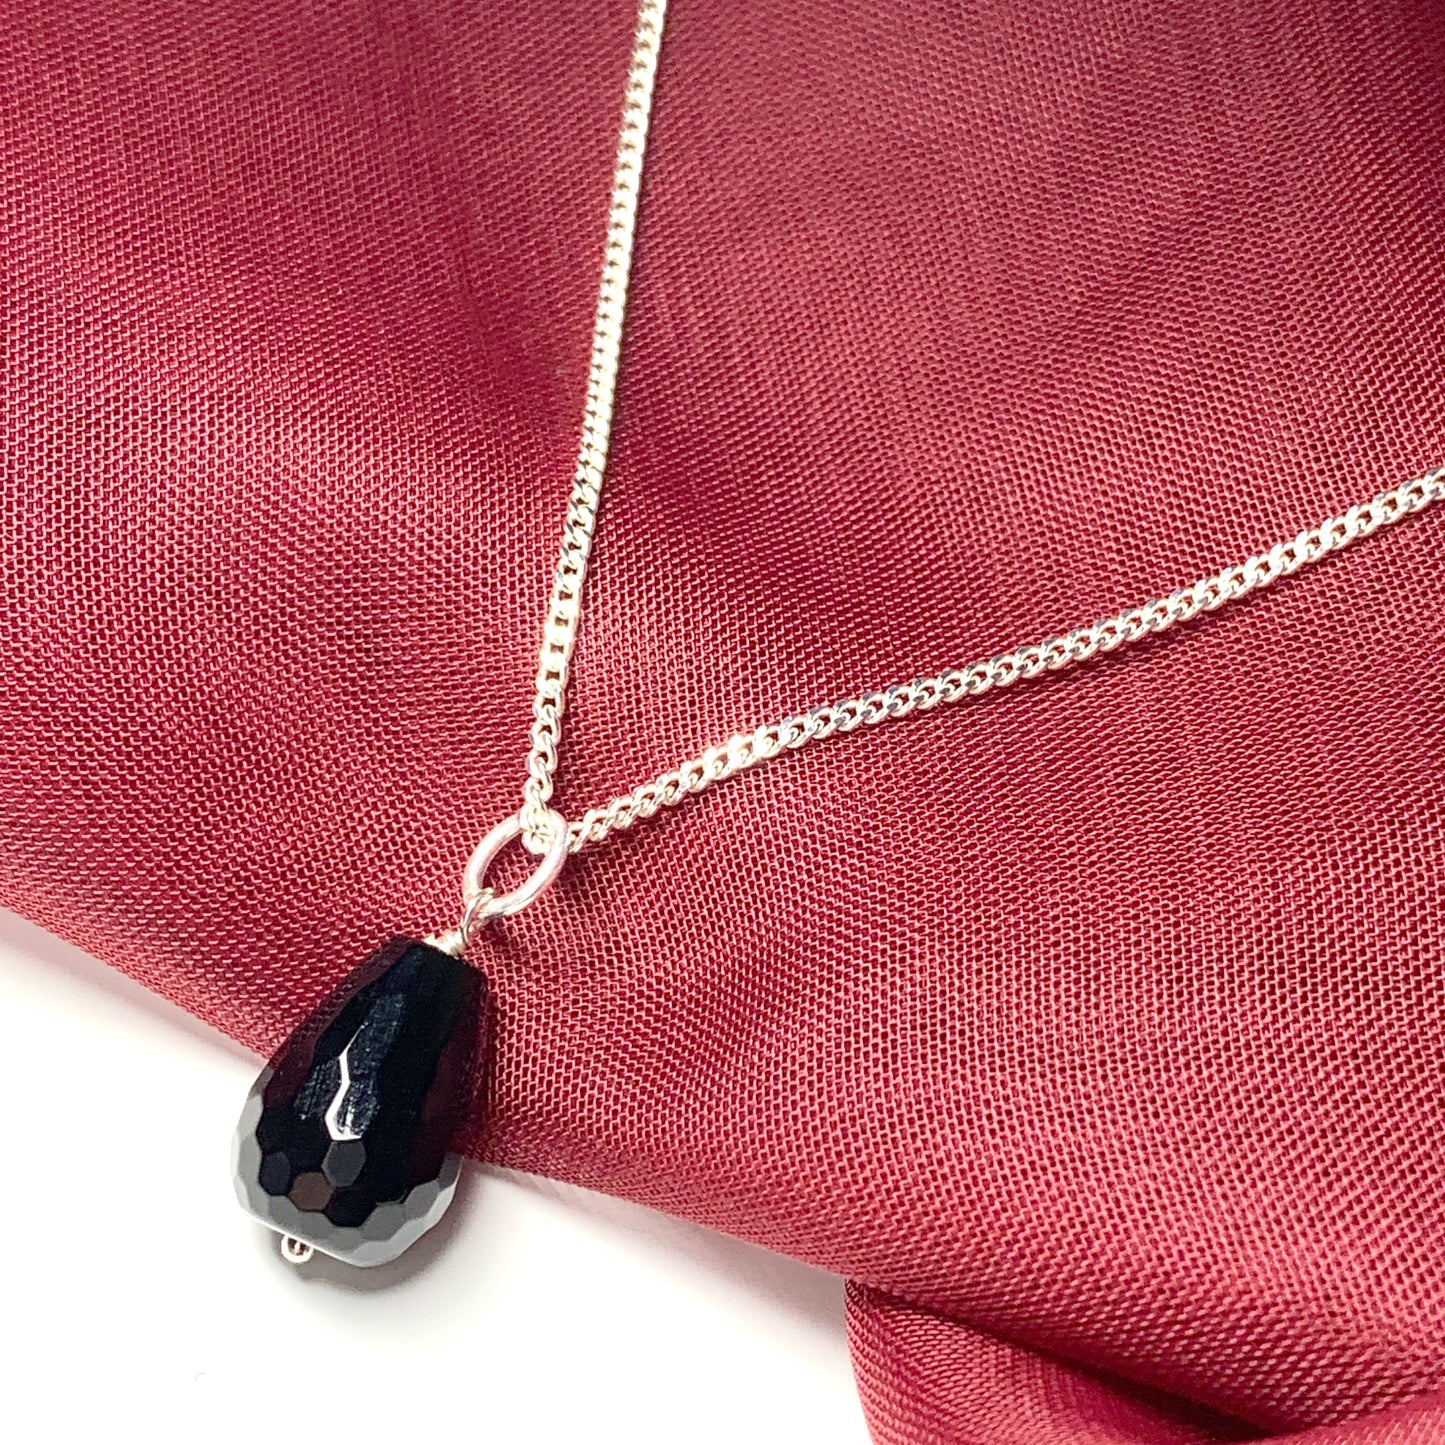 Tear Drop Silver Pear Shaped Onyx Necklace Pendent